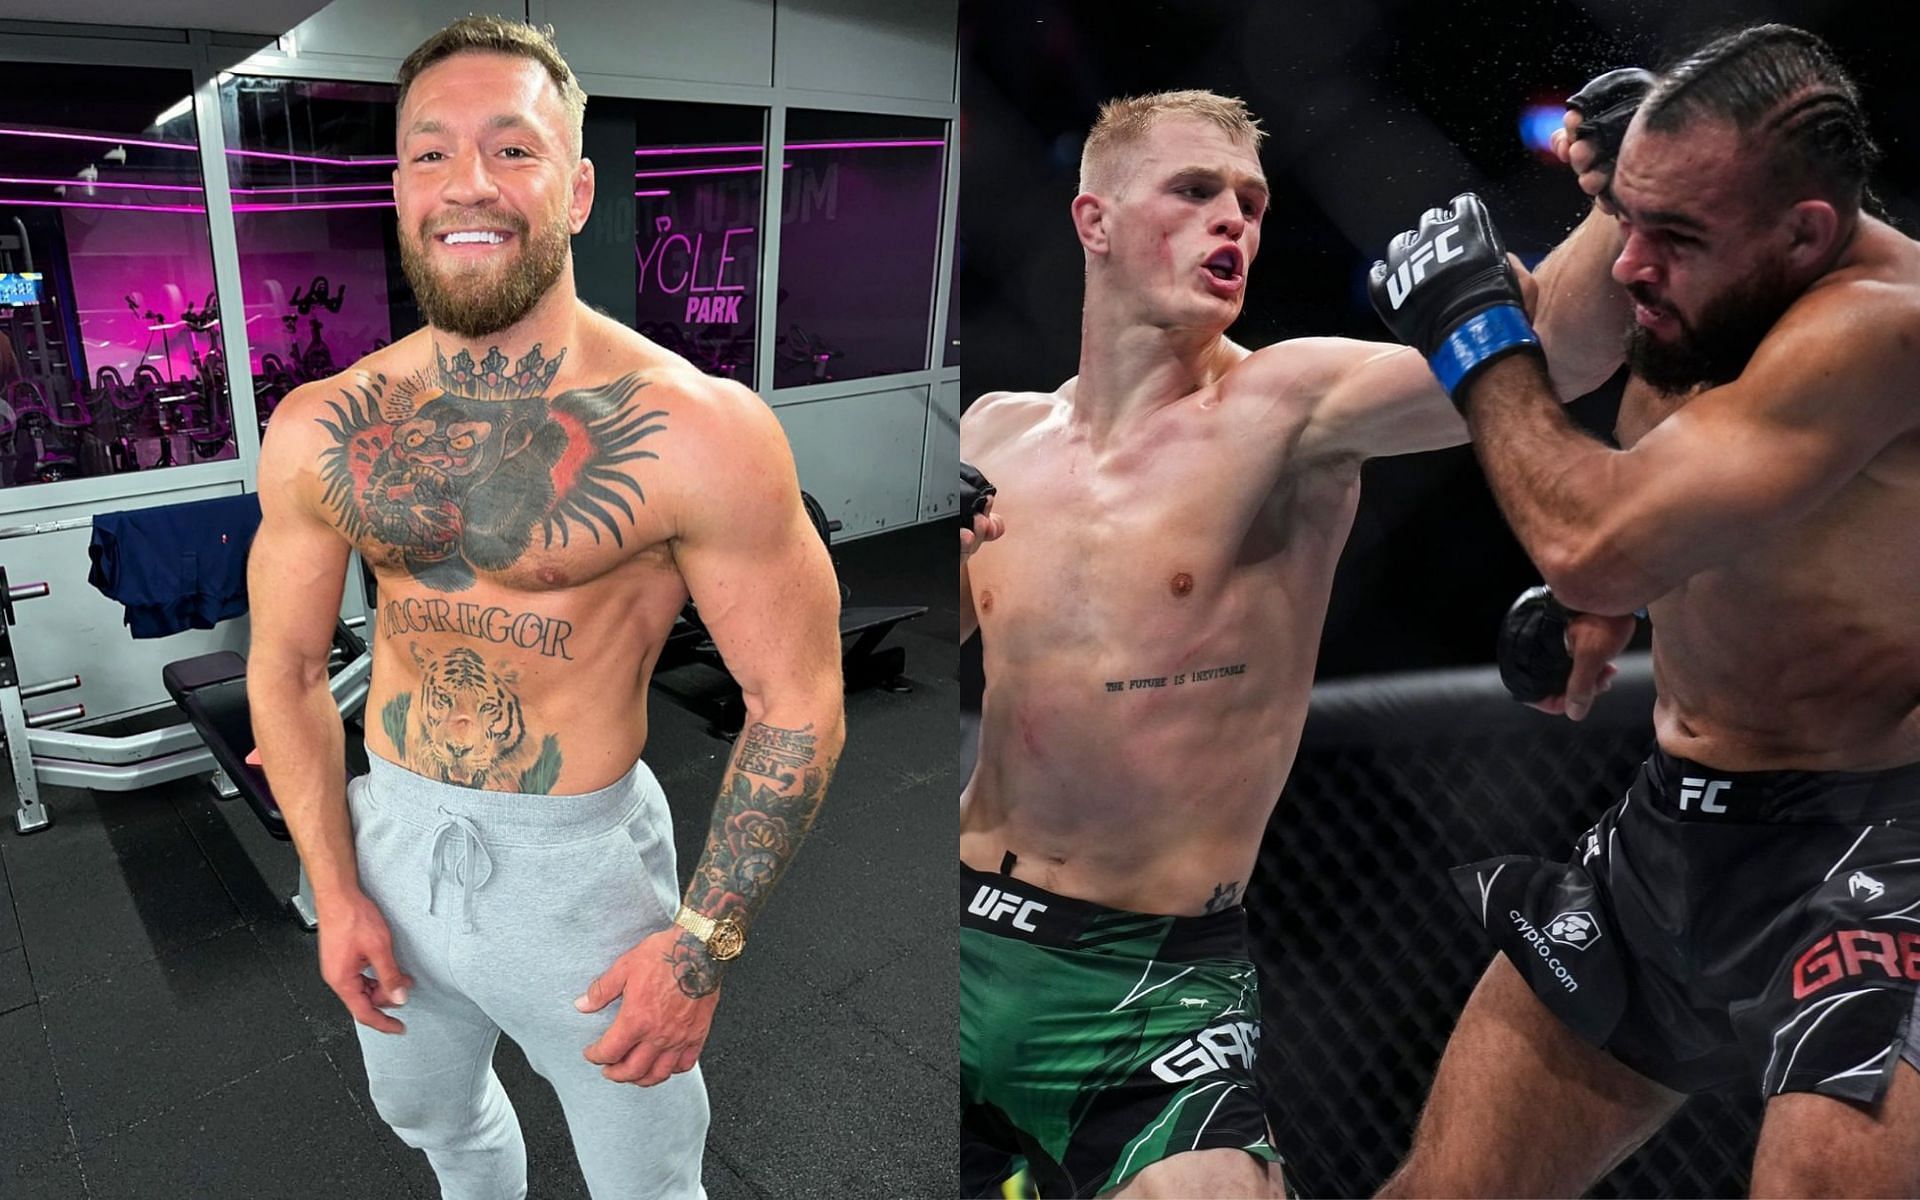 Conor McgGegor (L) and Ian Garry vs. Gabe Green (R) (via @thenotoriousmma and @ufc on Instagram)